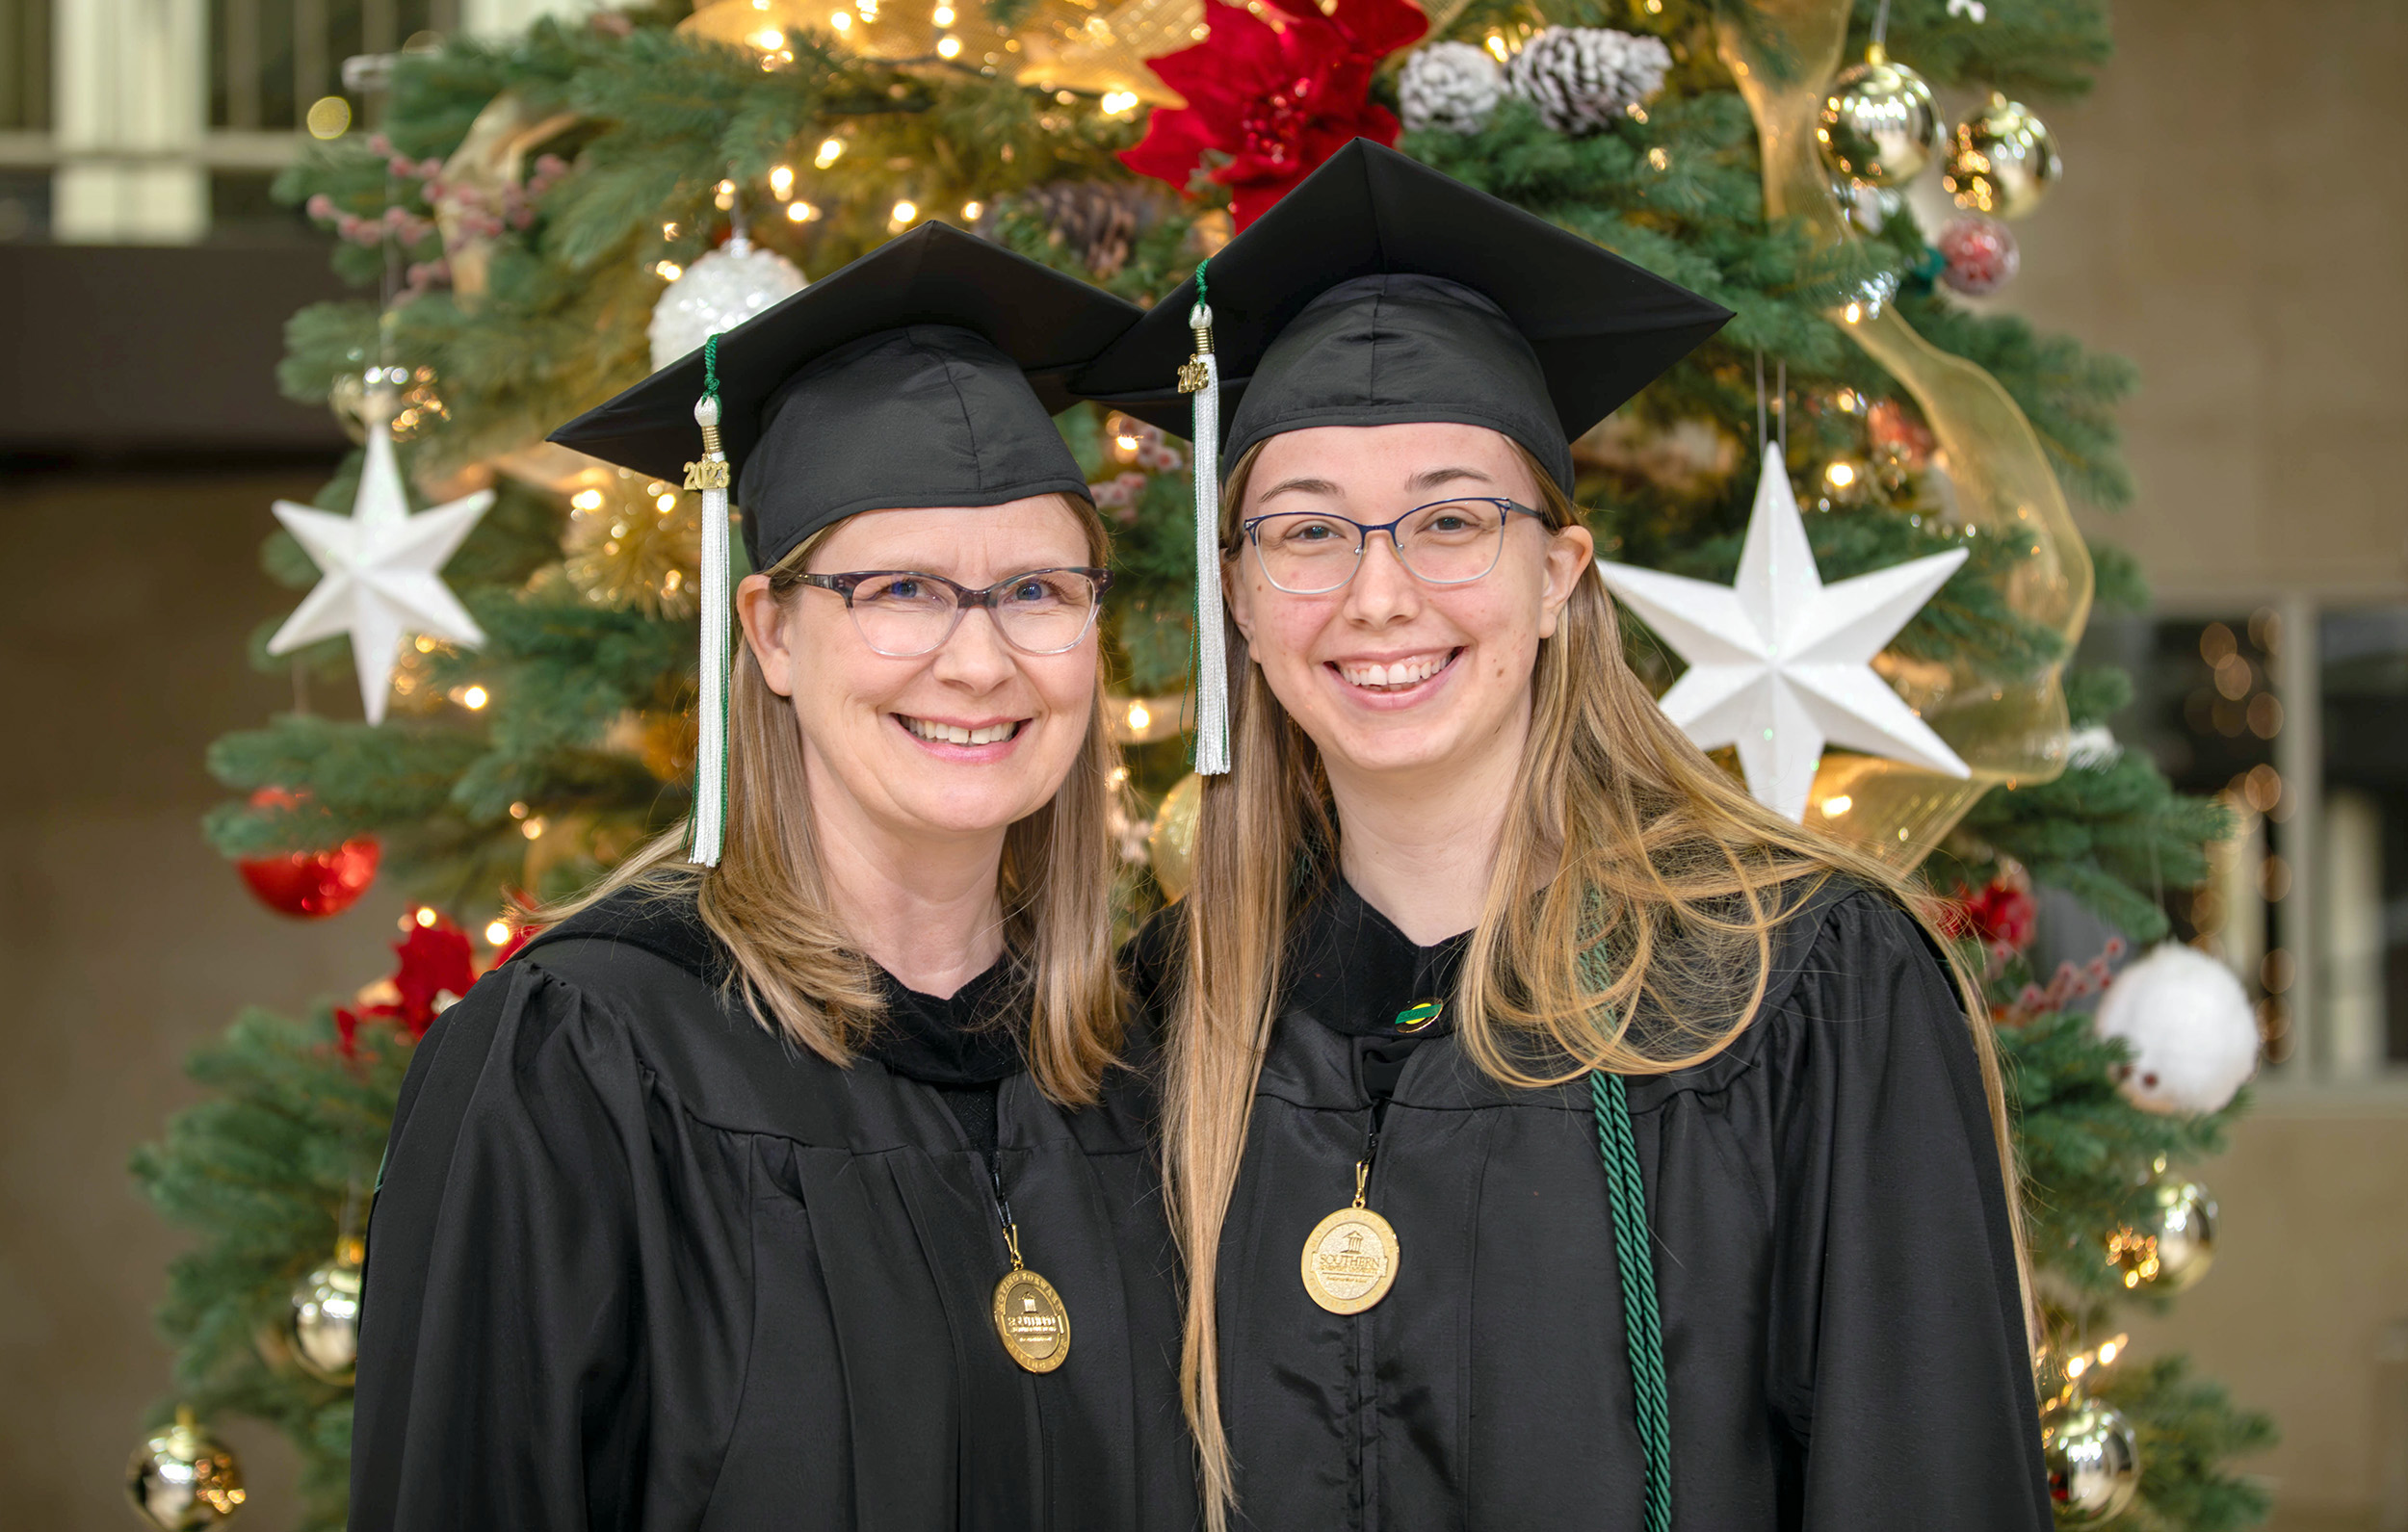 Two women in graduation caps smiling and looking towards the camera.